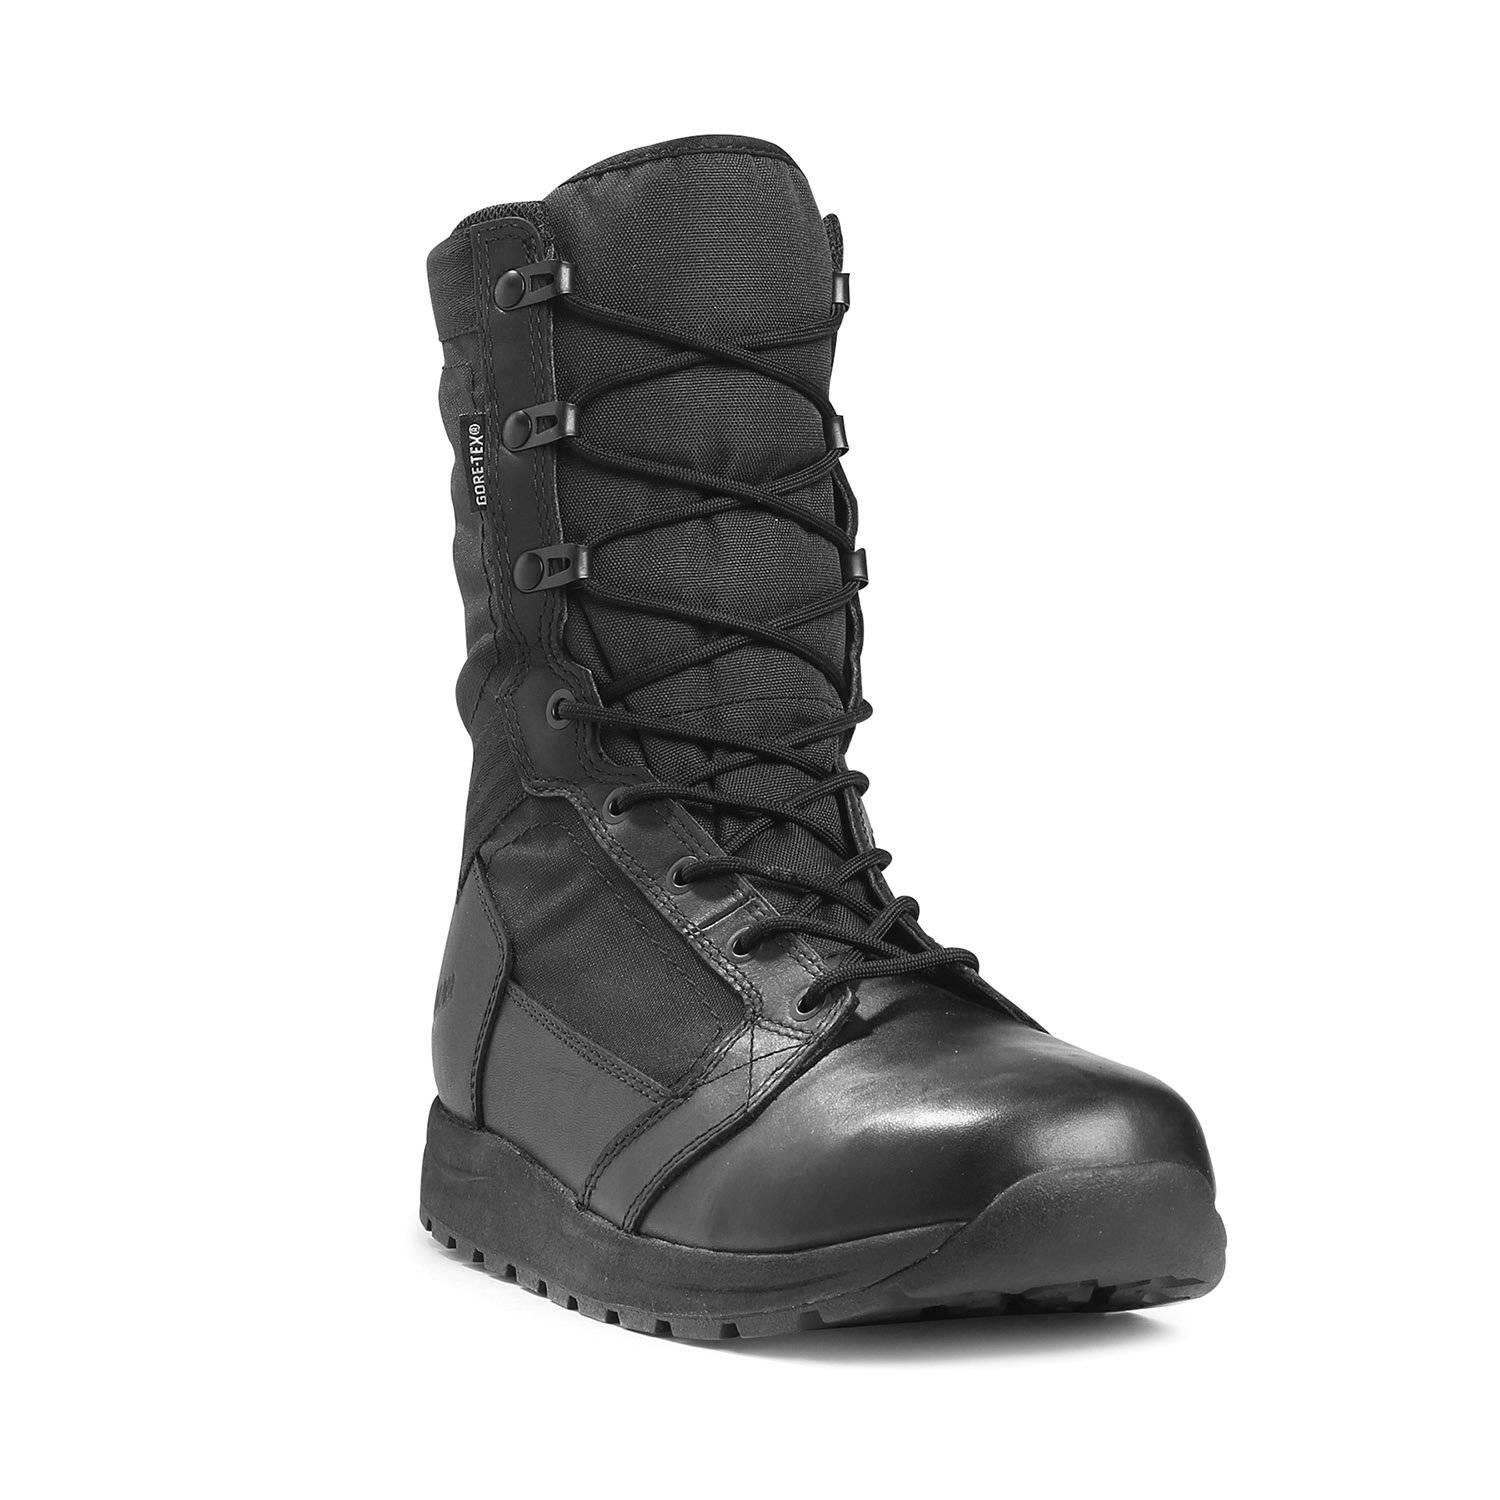 Danner gear at Galls, the public safety authority